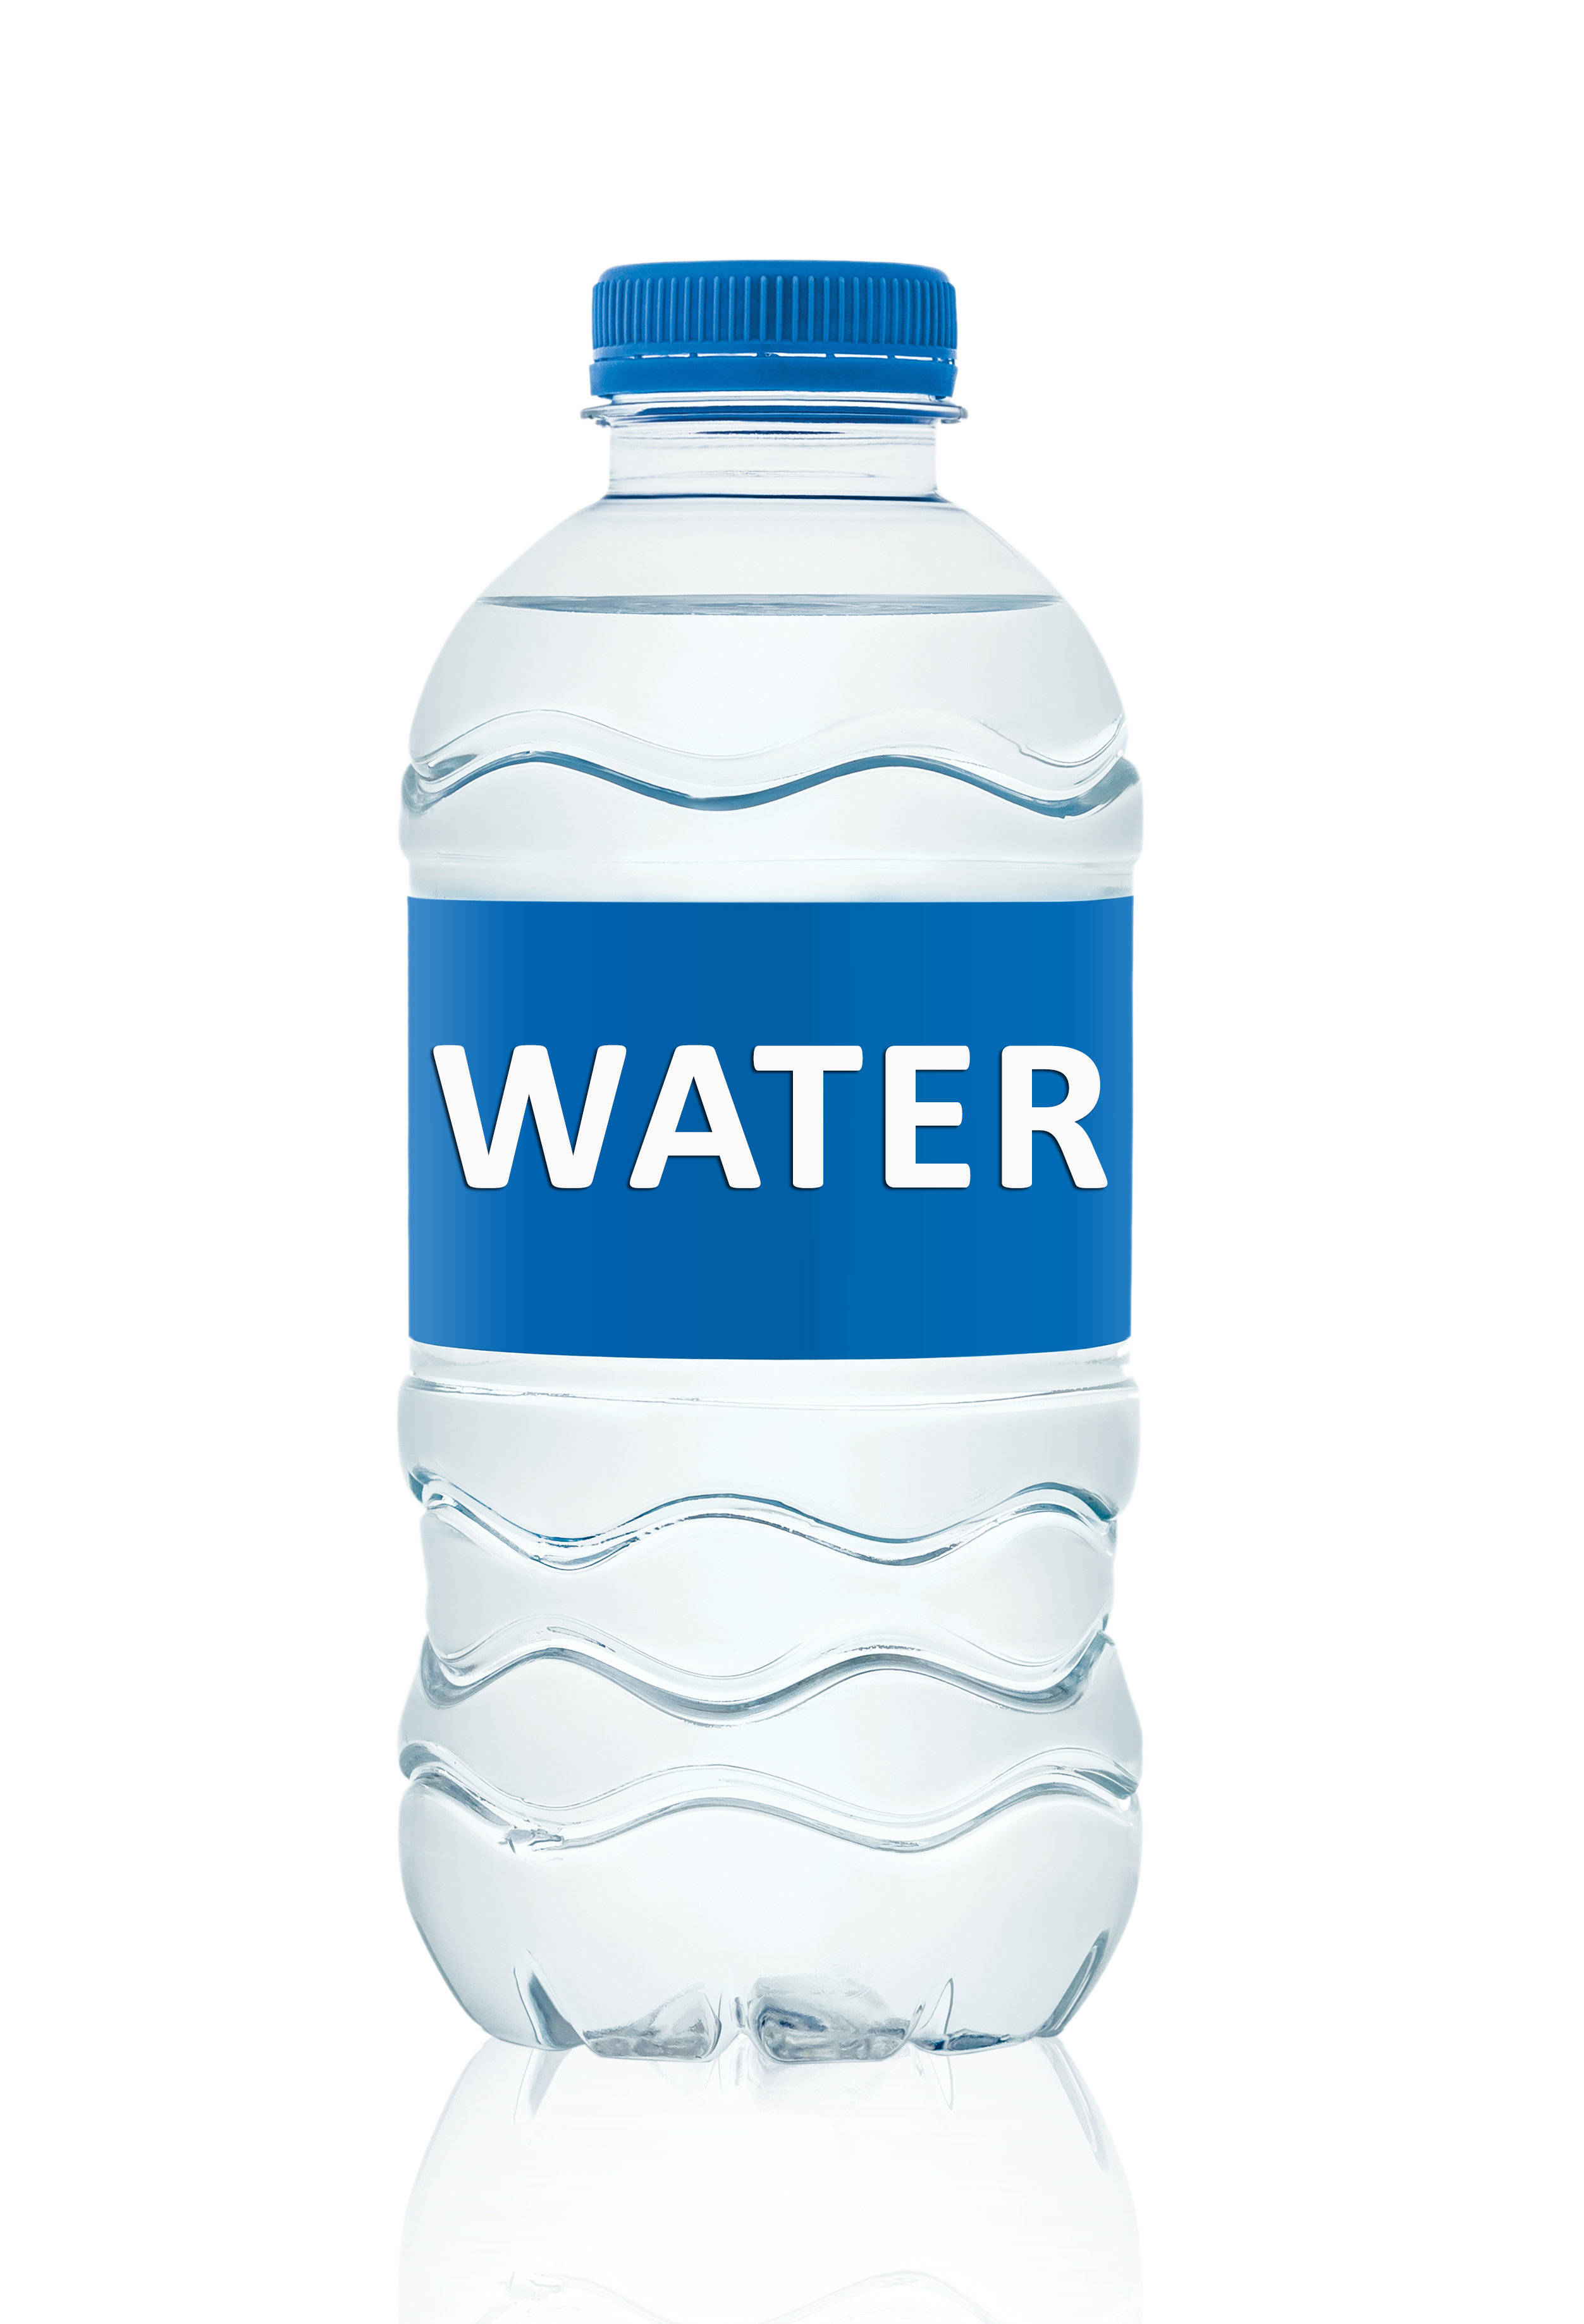 Water Bottle PNG Image in Transparent